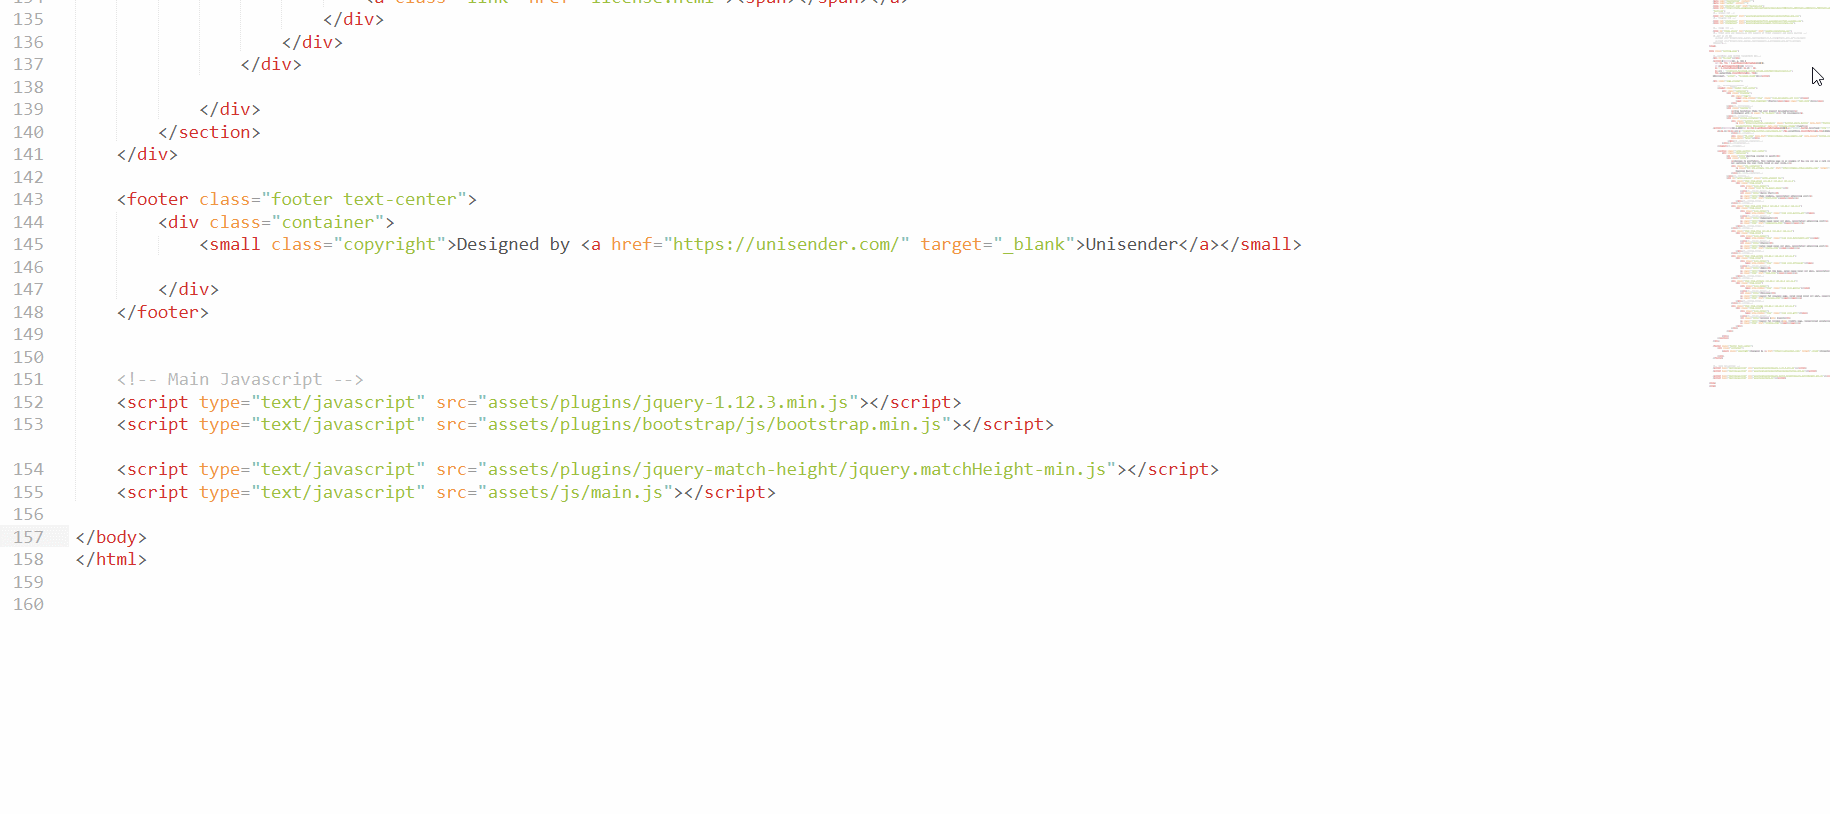 Pasting the form code into the website source code 